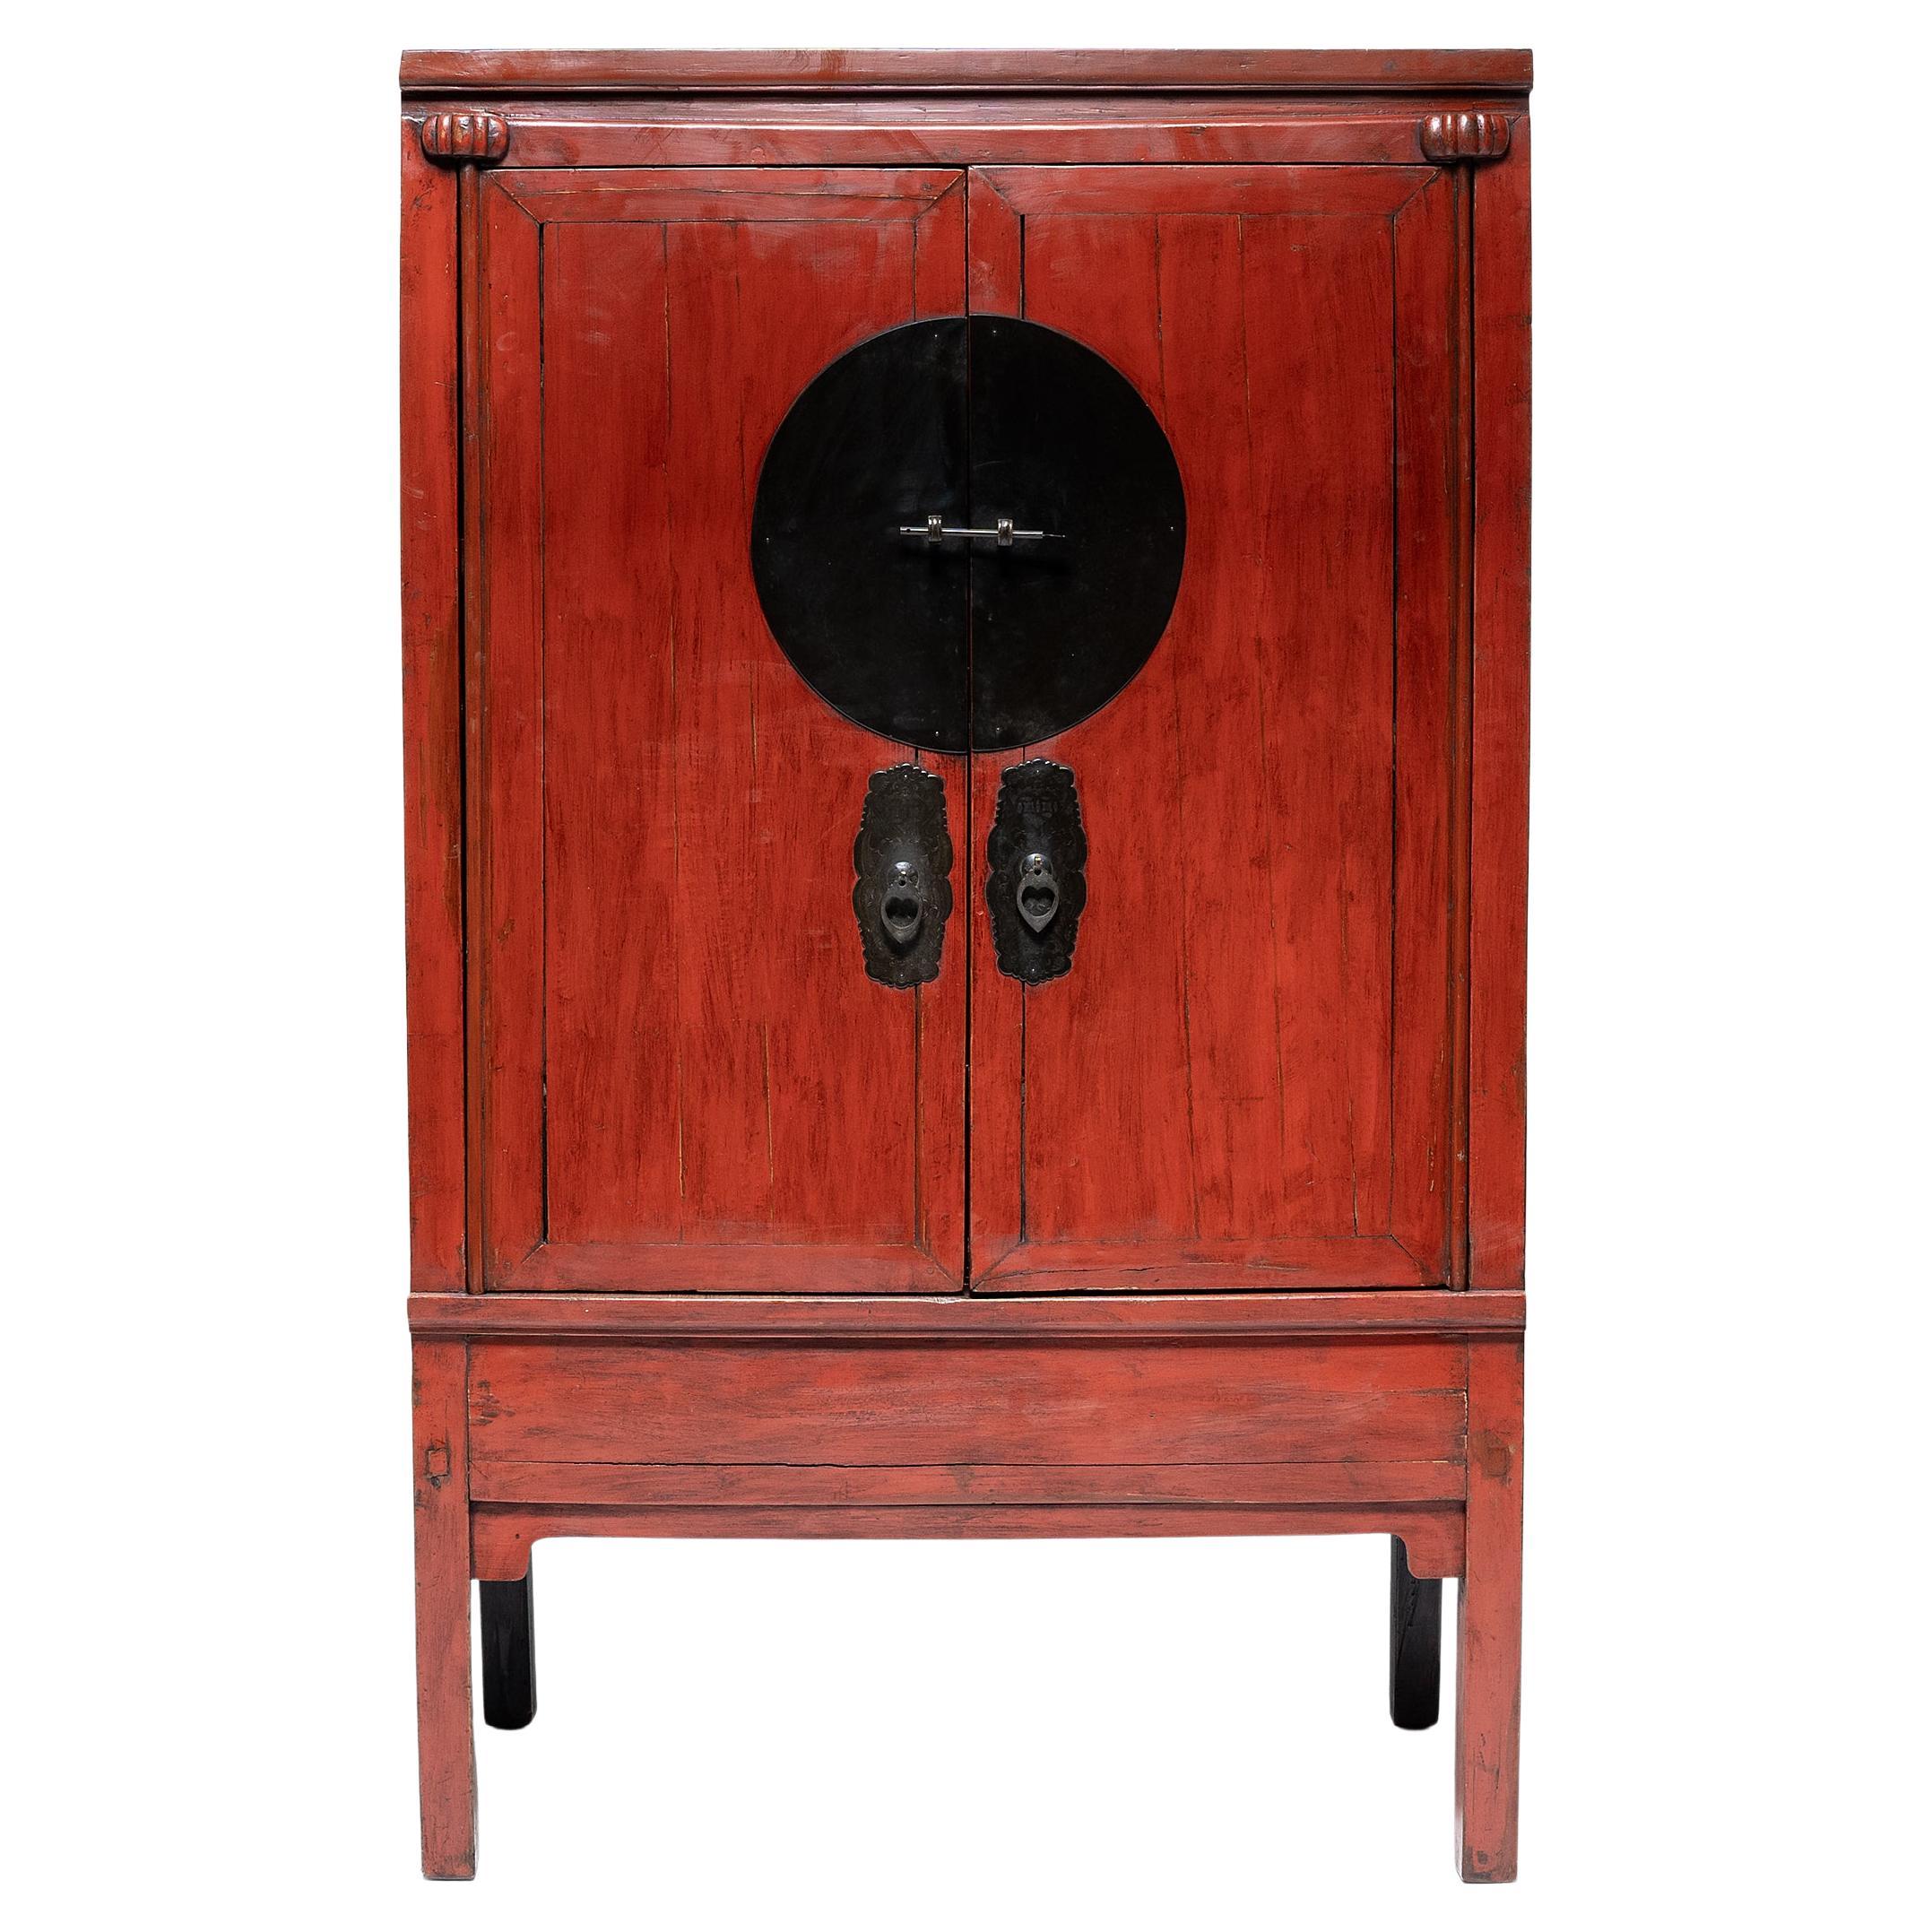 What is a Chinese wedding cabinet?